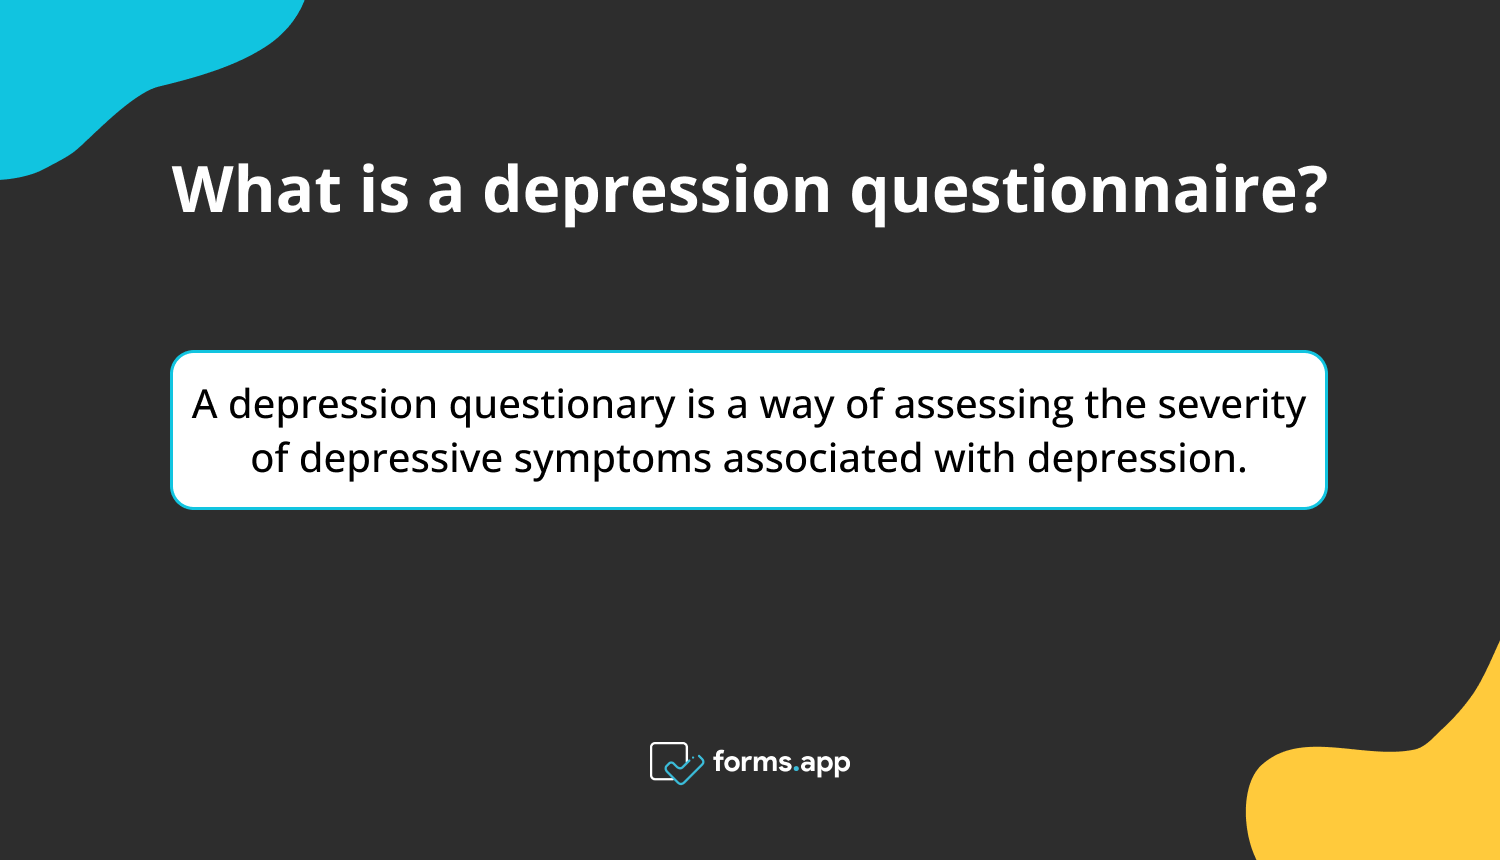 The definition of depression questionnaire